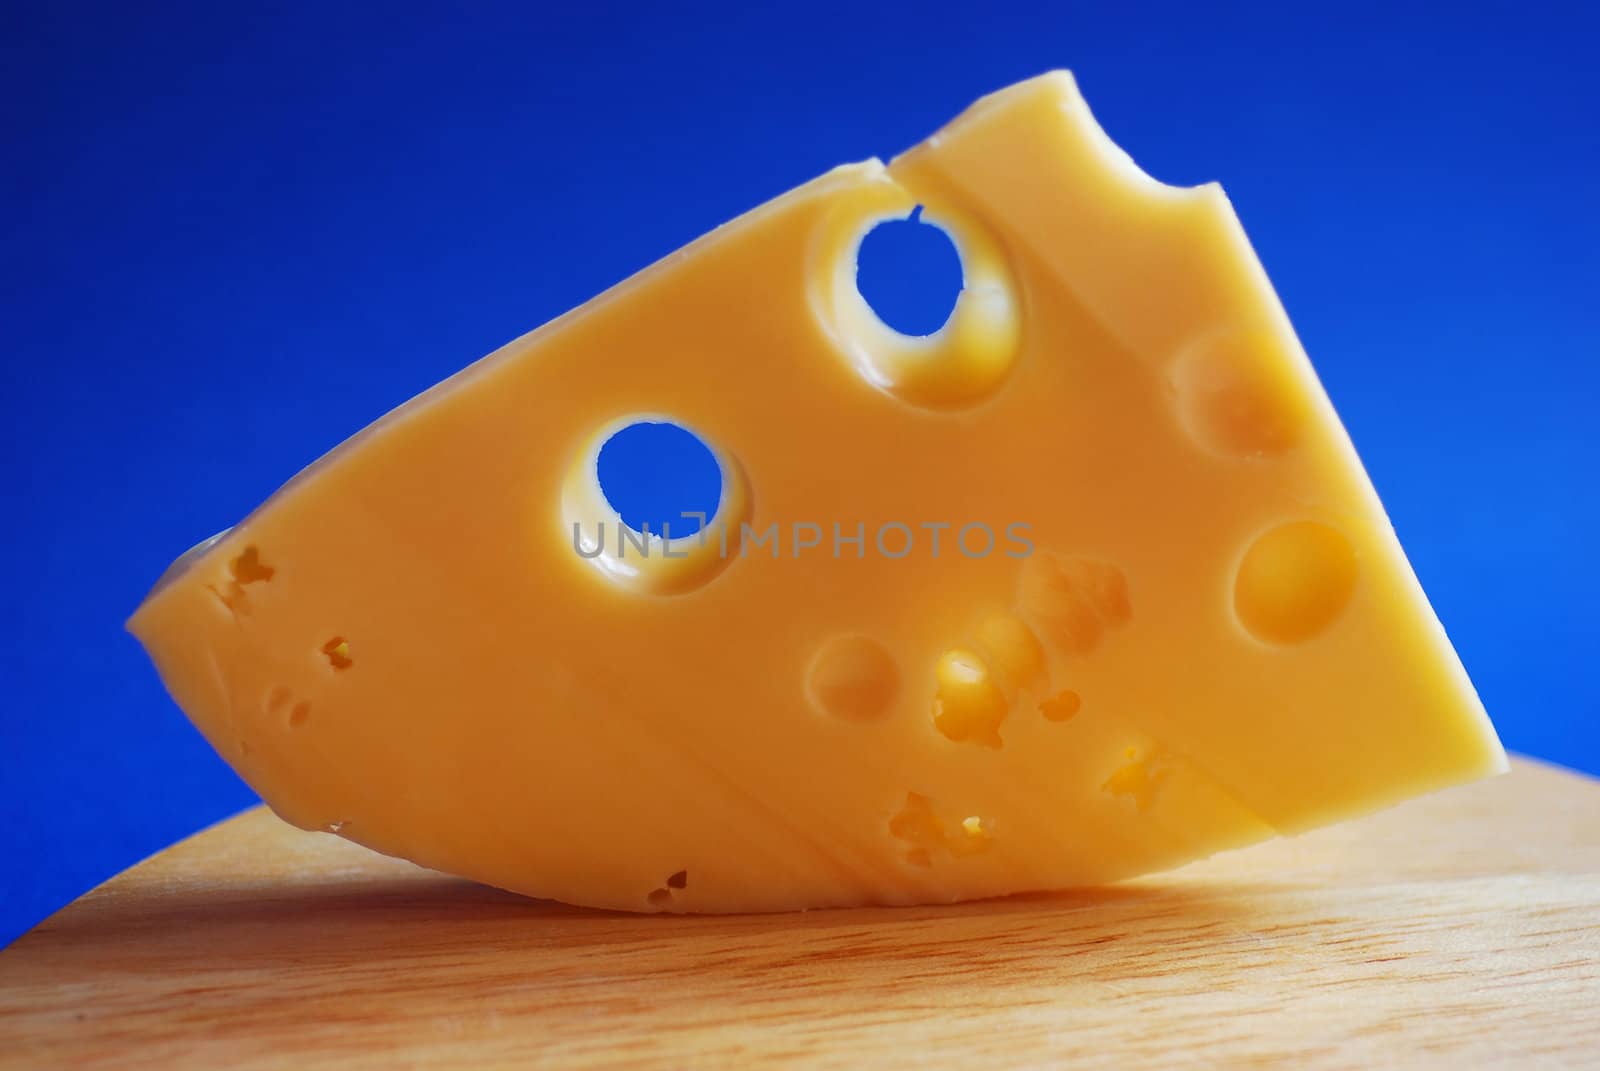 Piece of cheese on a blue background.